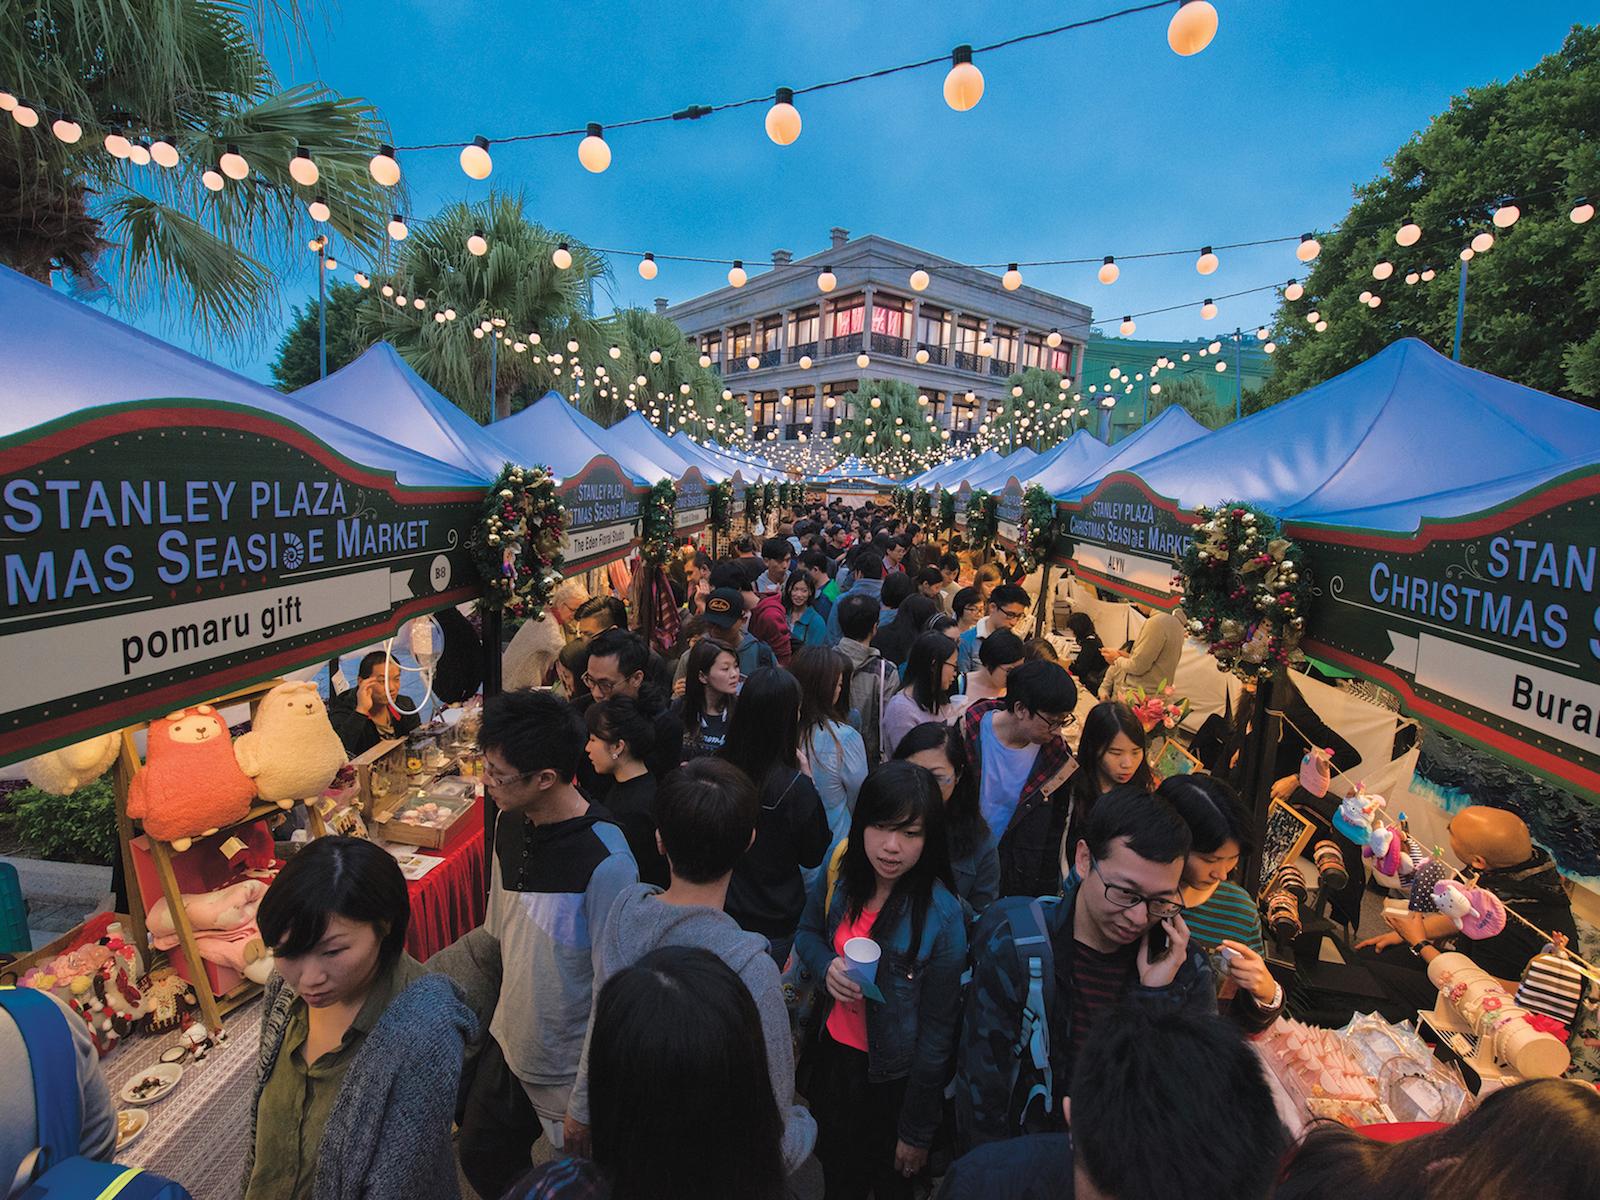 8 Festive Things To Do In Hong Kong This Christmas